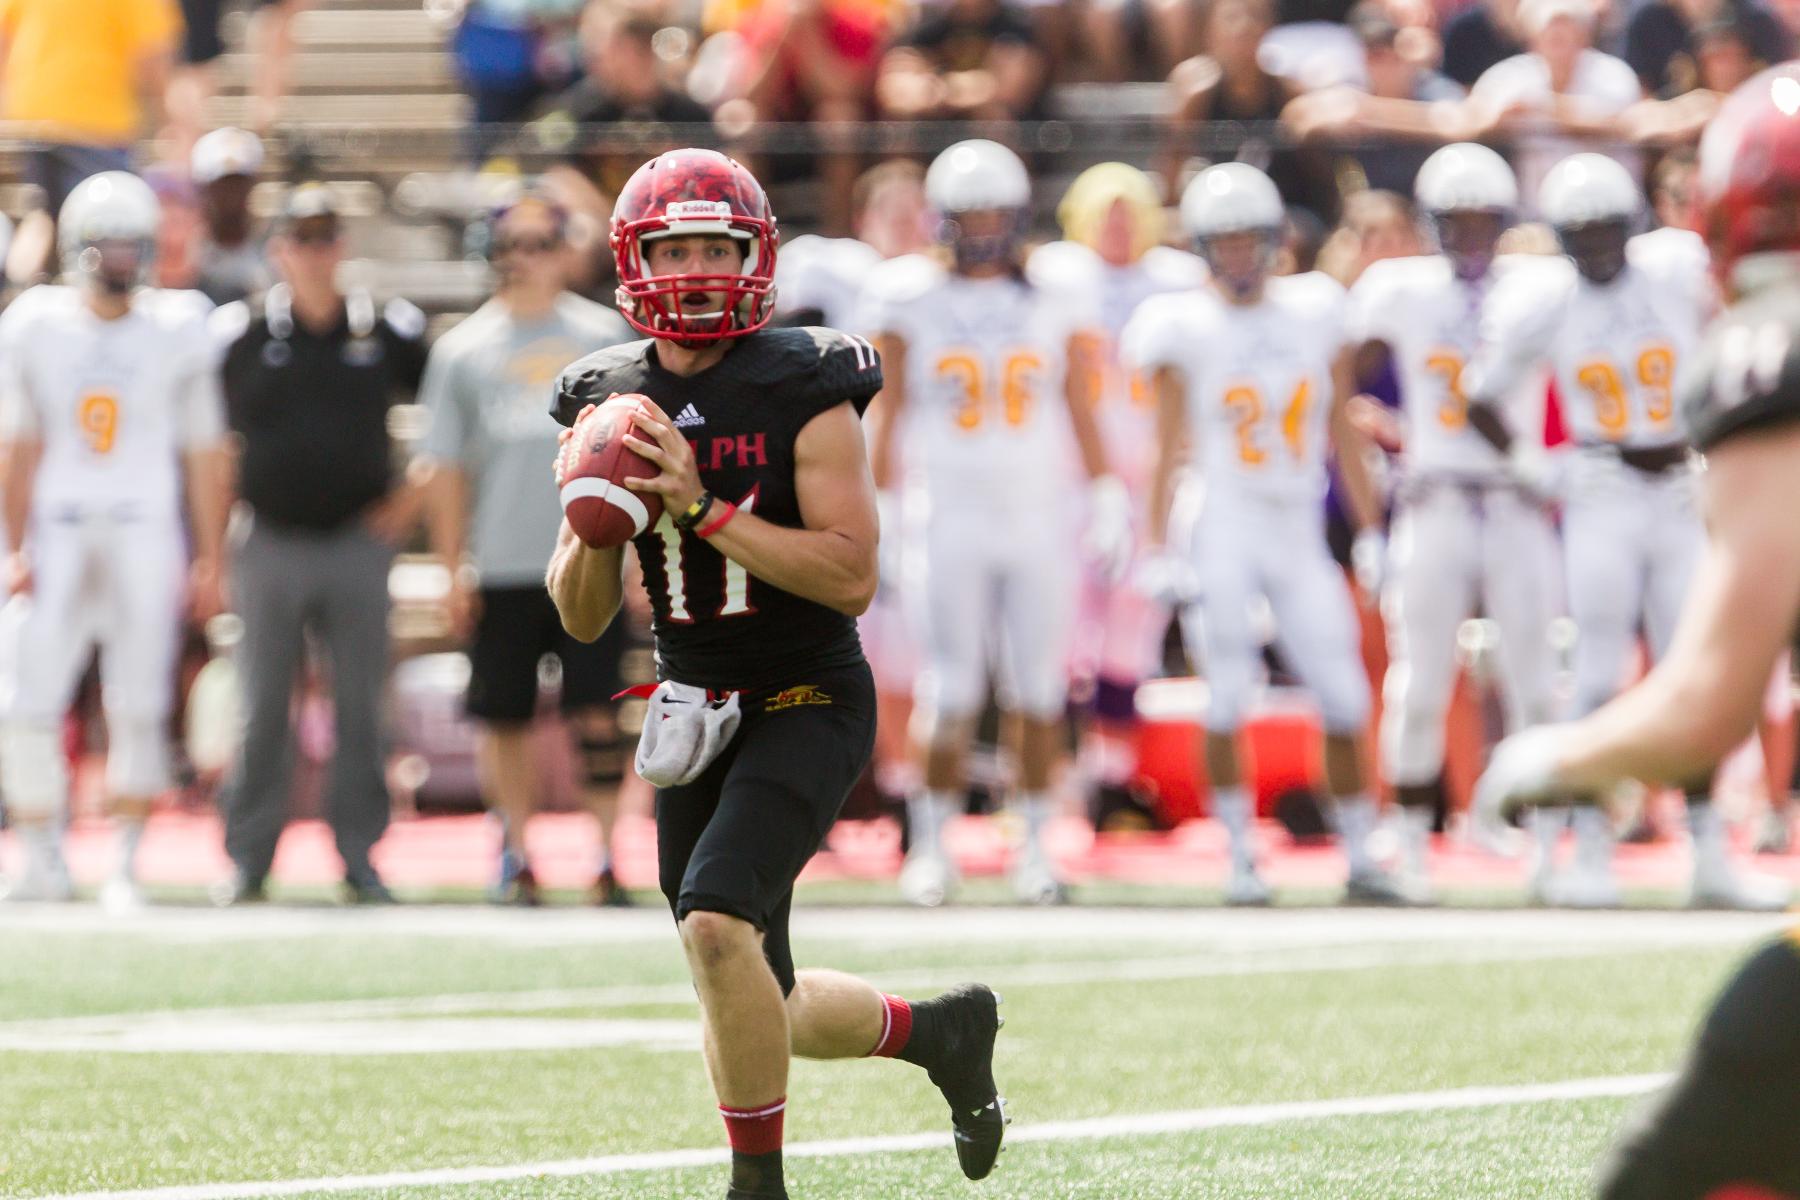 2016 CIS FOOTBALL PLAYER TO WATCH: Guelph's James Roberts